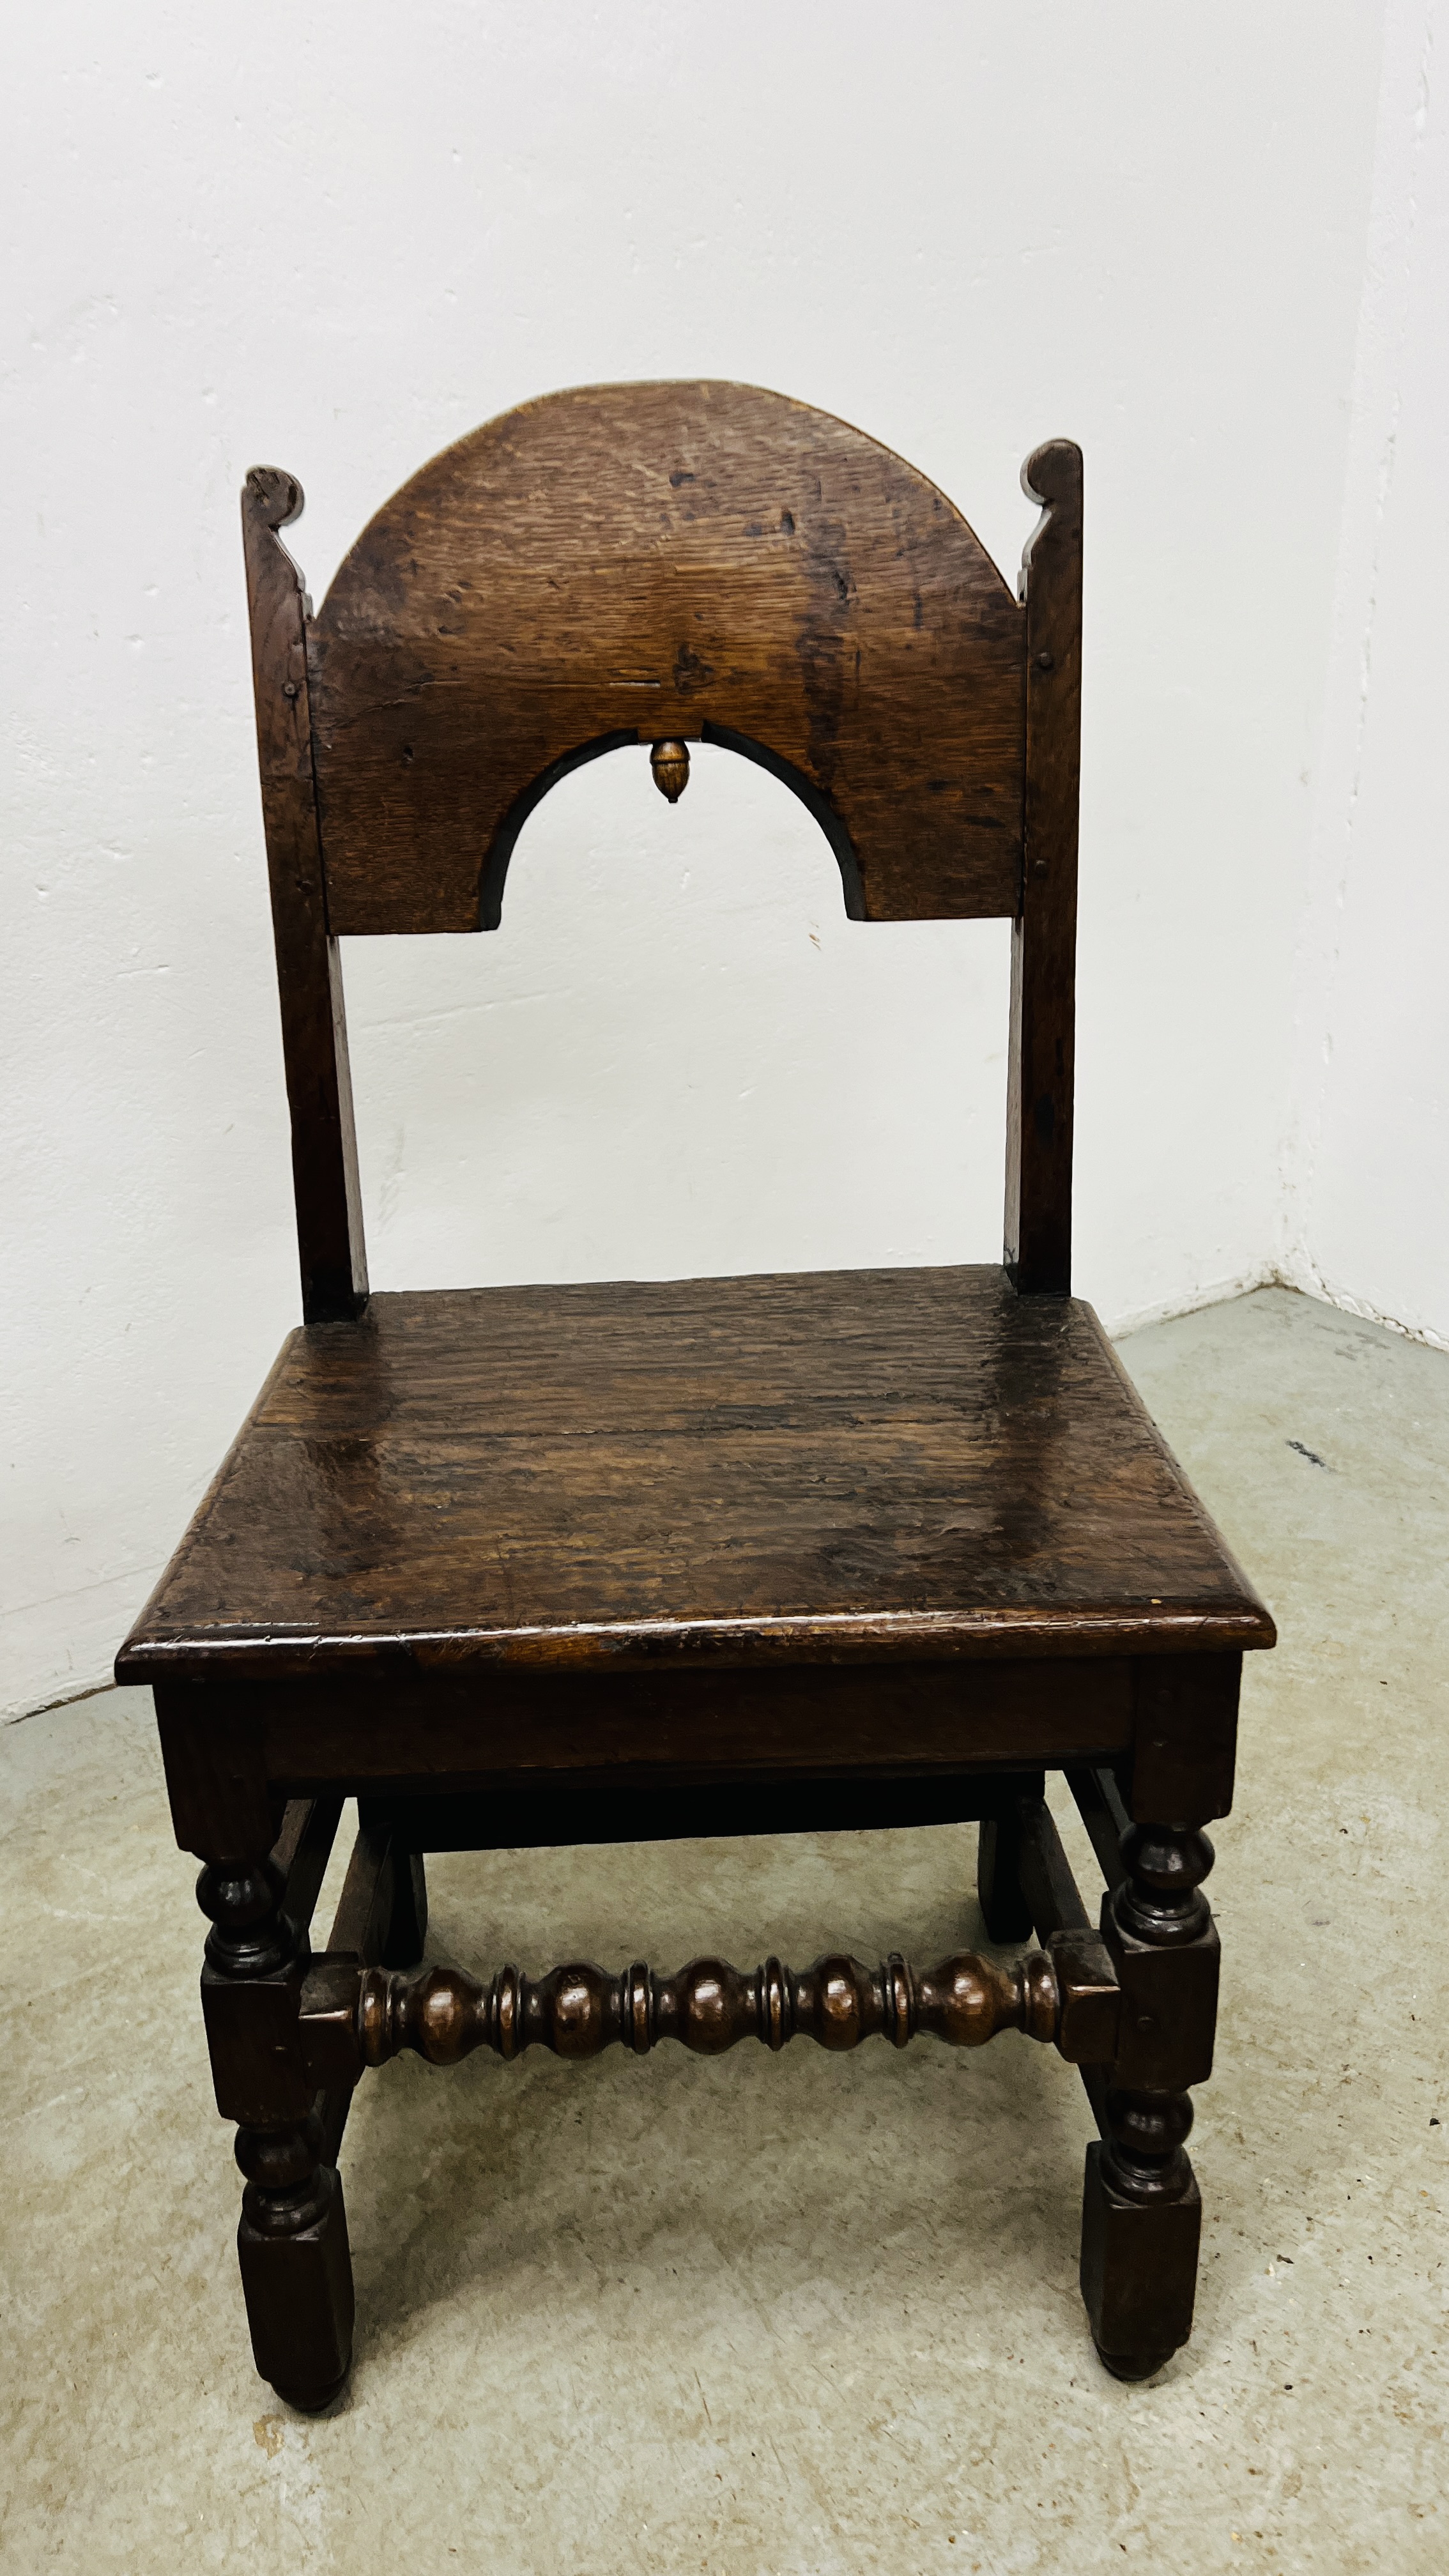 A PAIR OF 17TH CENTURY JOINED OAK CHAIRS, POSSIBLY NORTH COUNTRY. - Image 12 of 20